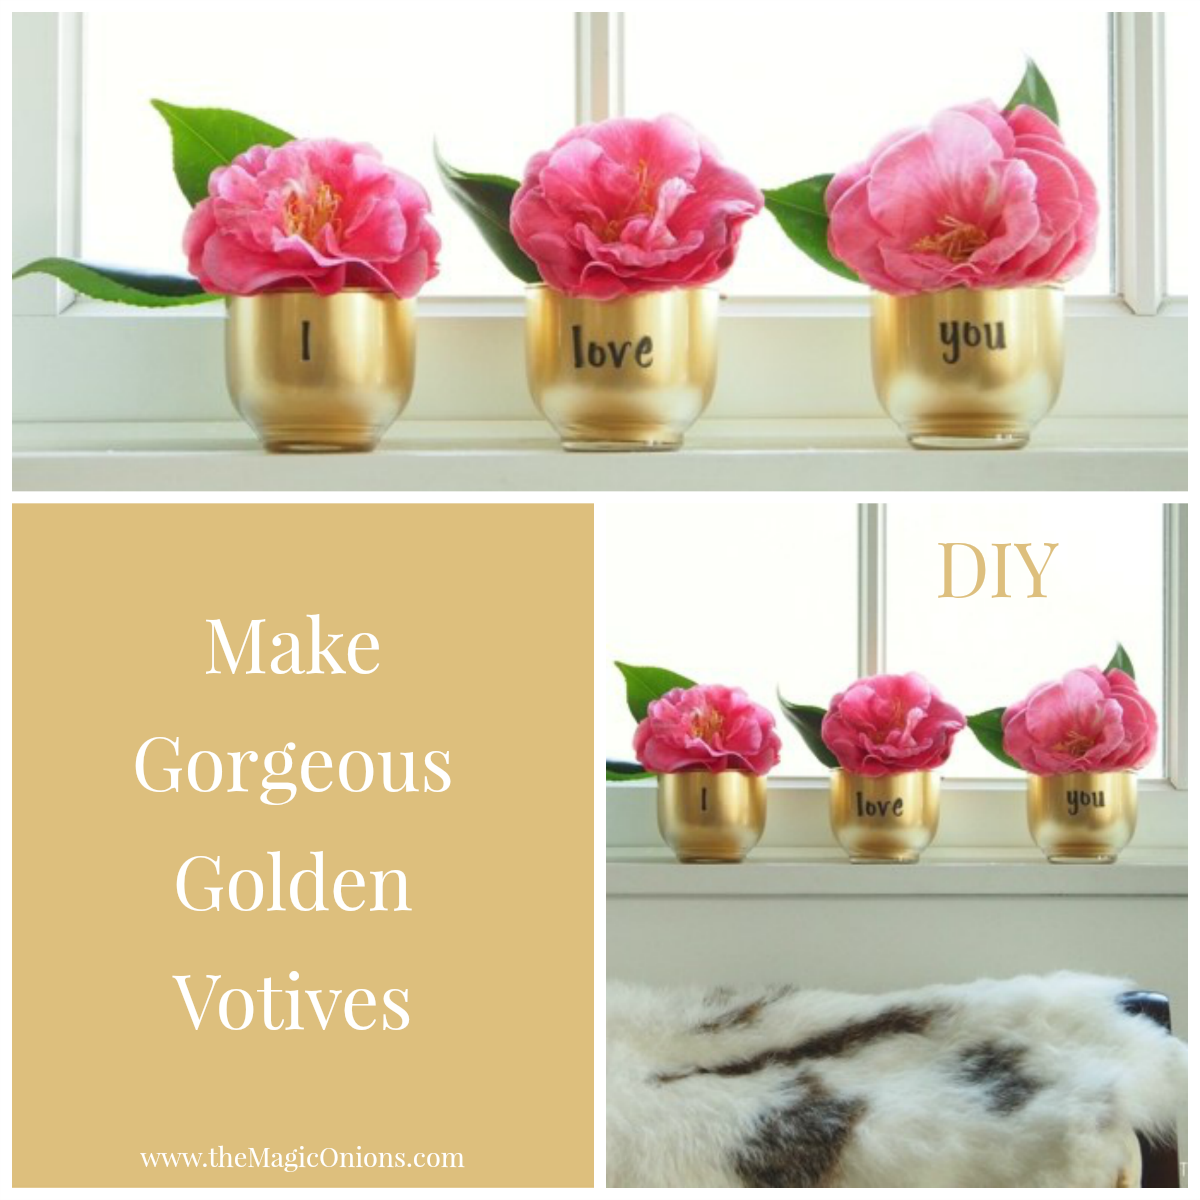 Make gorgeous GOLDEN votives in just a few easy steps with this fun tutorials from The Magic Onions